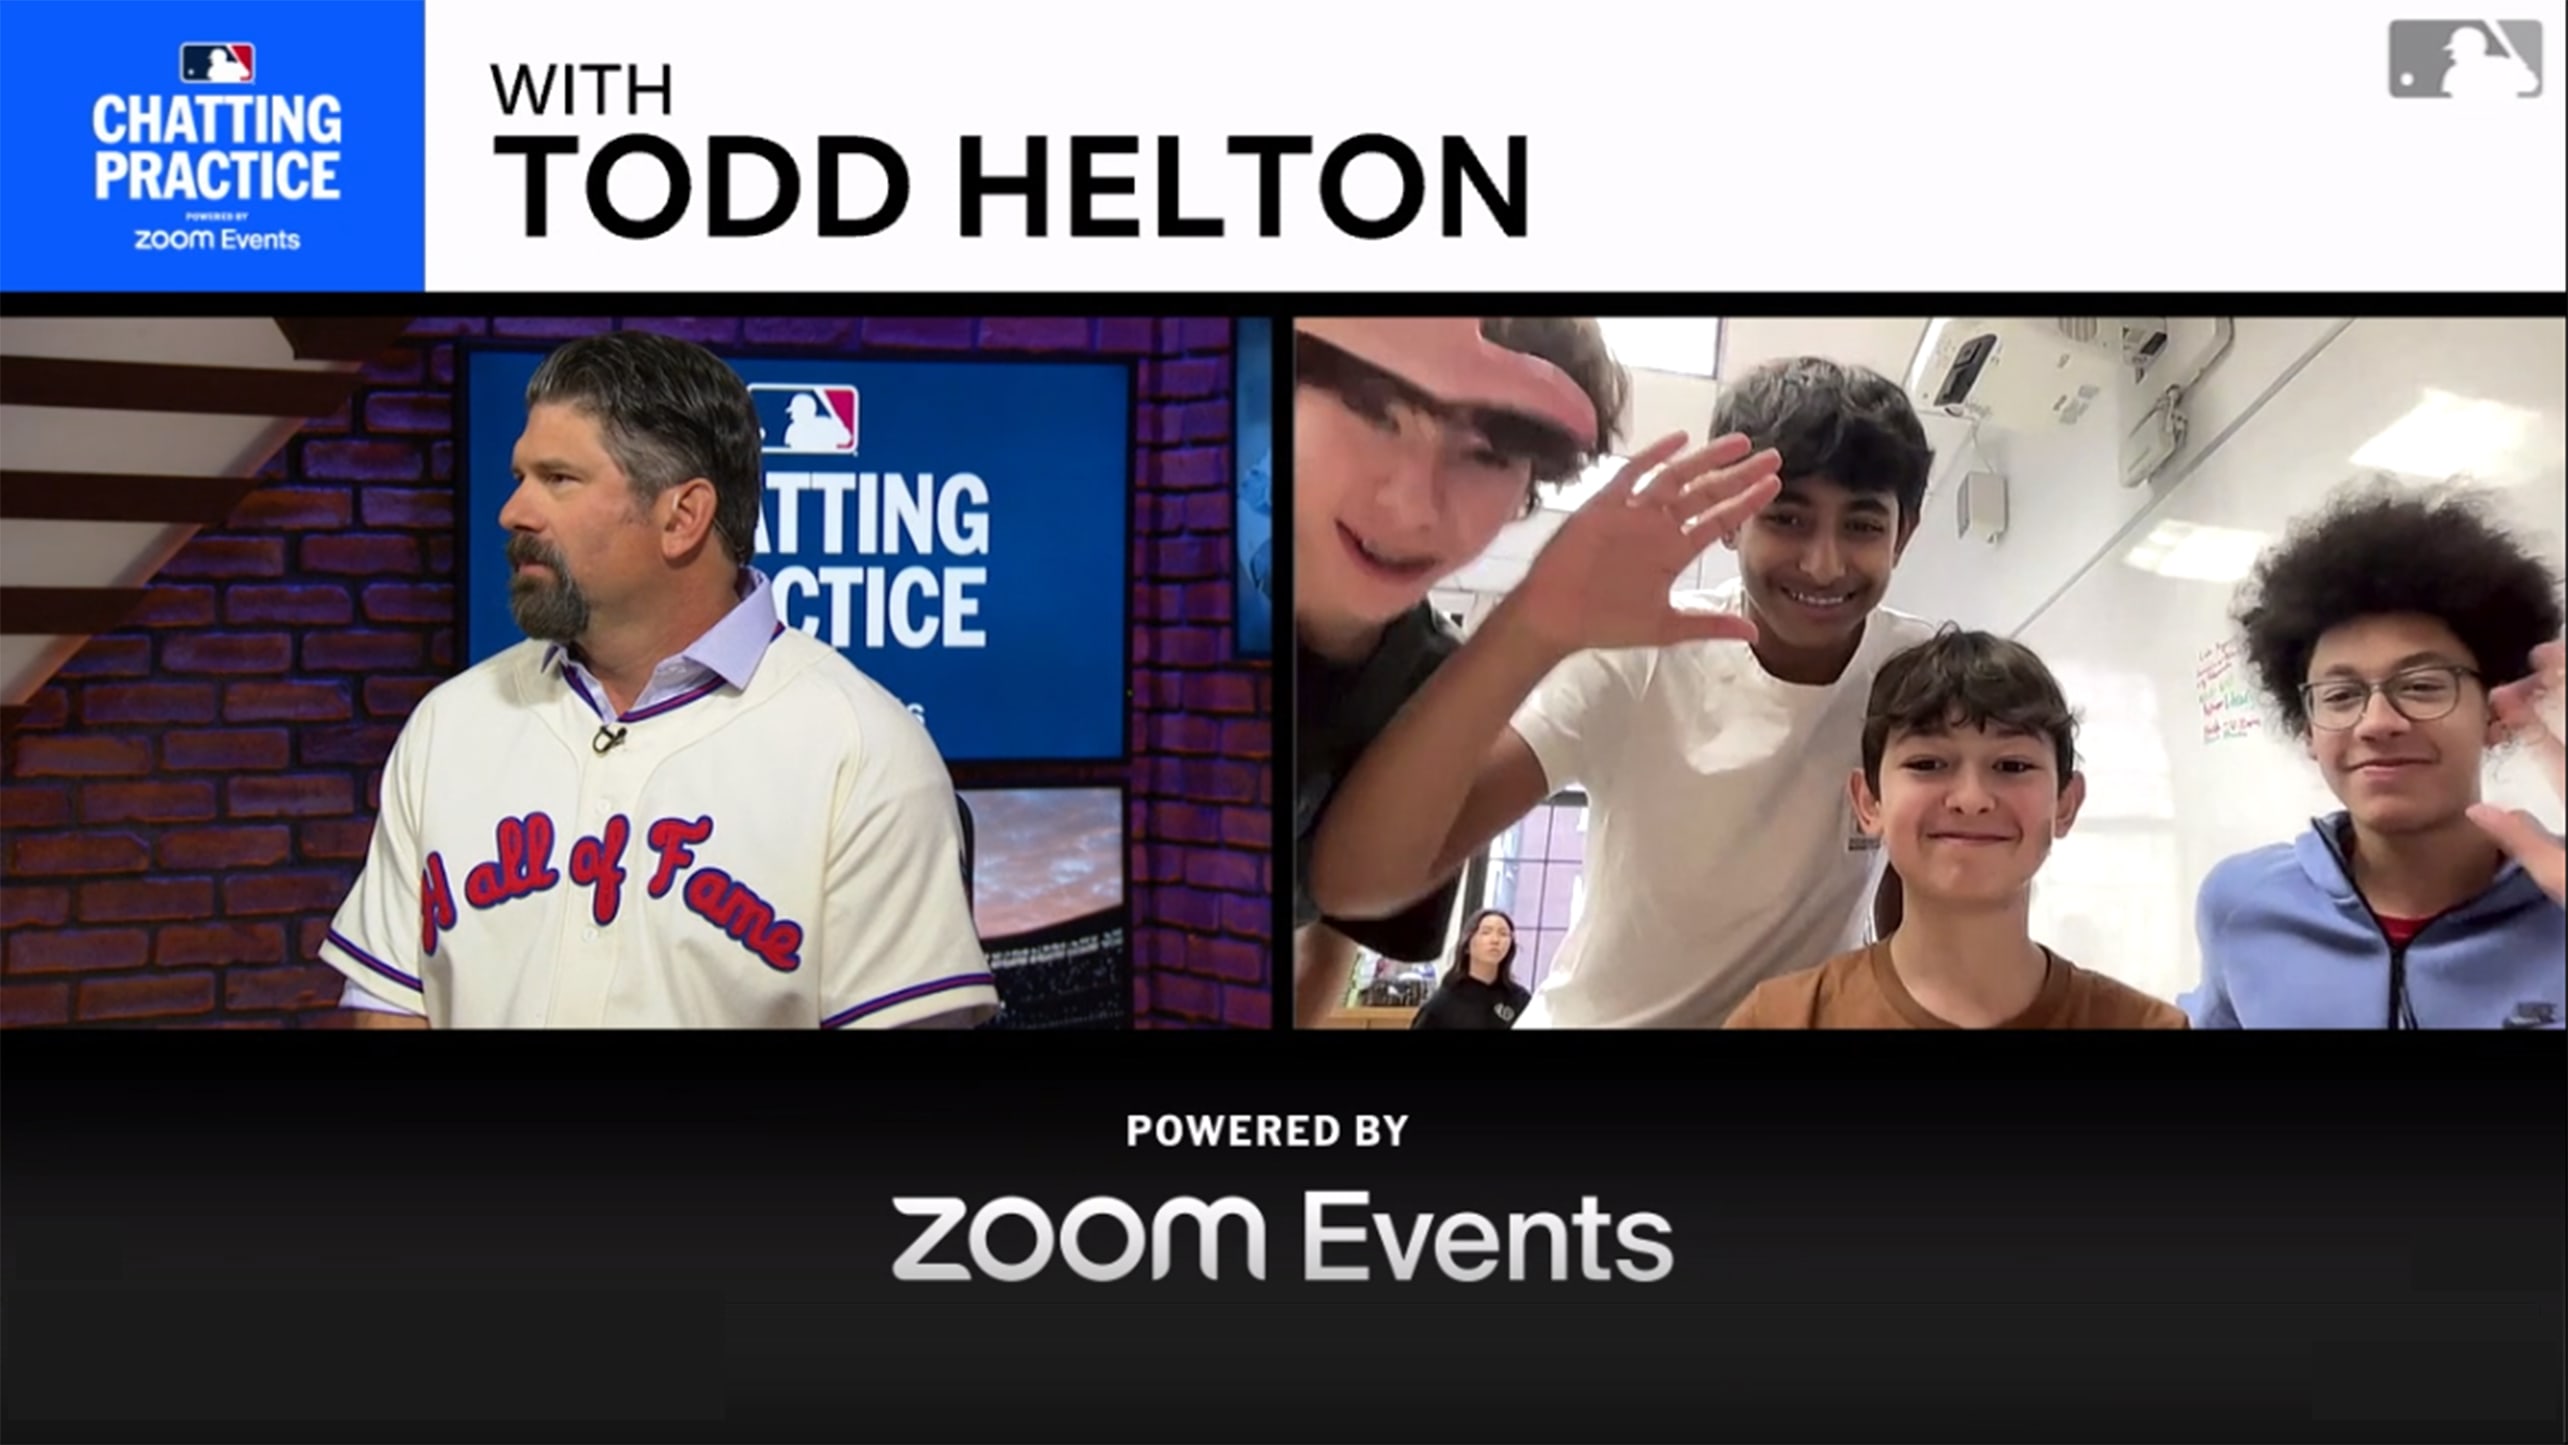 Todd Helton takes fans' questions